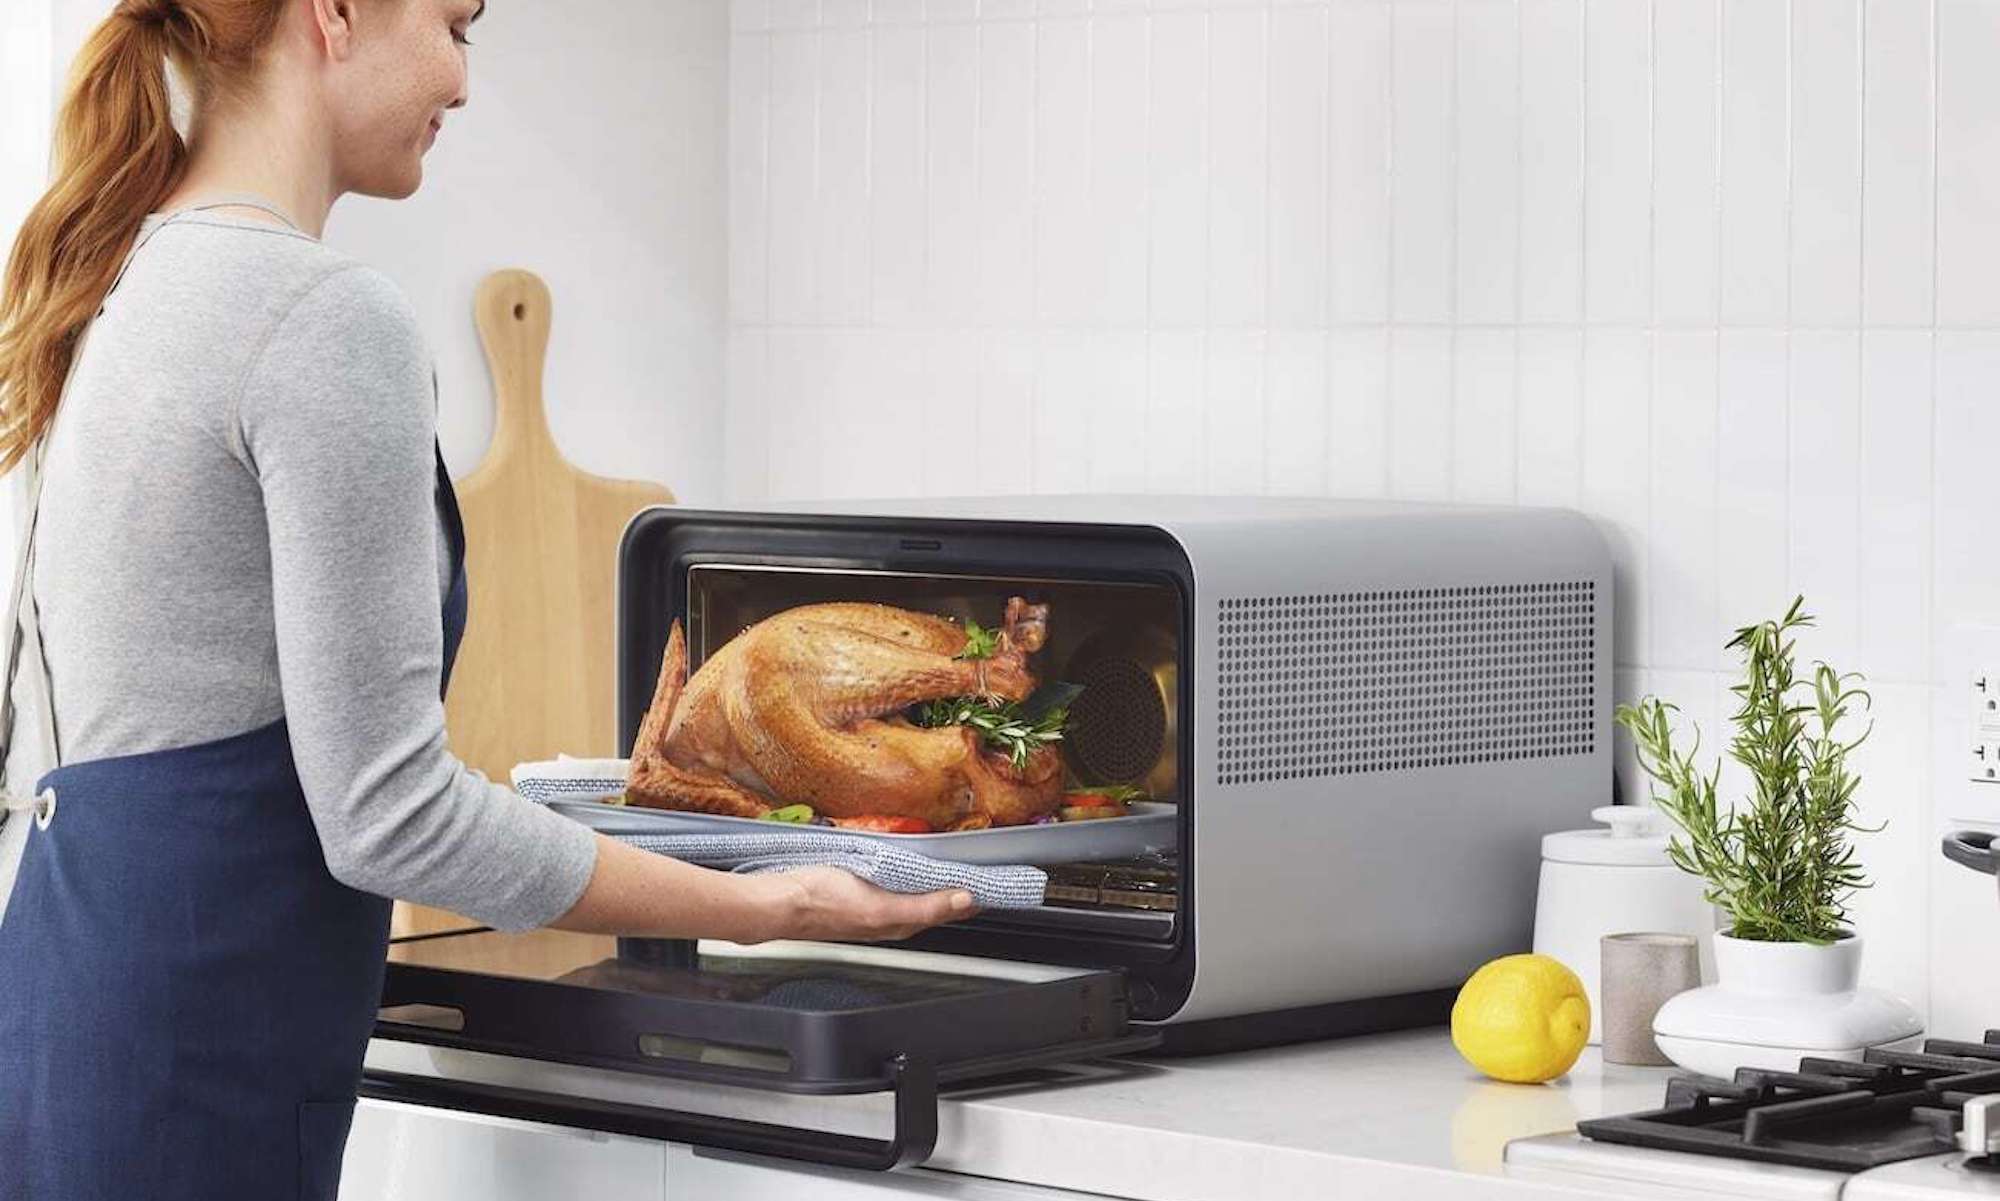 Best kitchen gadgets to fast-track your Thanksgiving prep » Gadget Flow